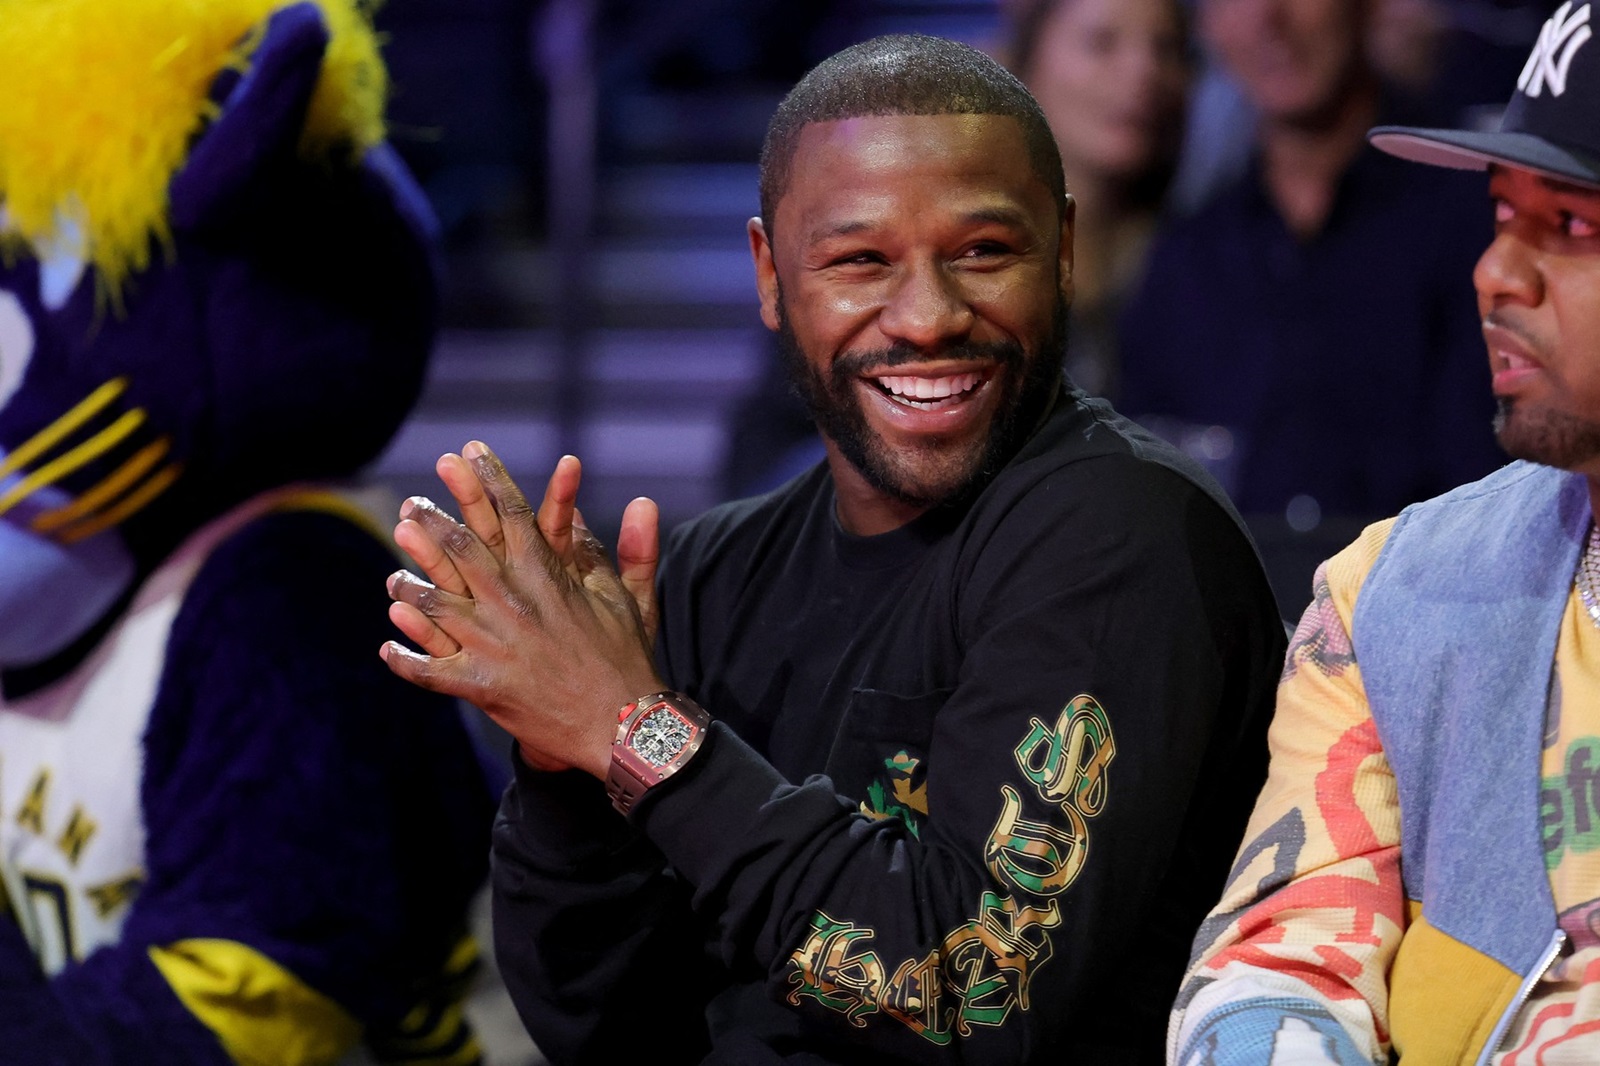 LAS VEGAS, NEVADA - DECEMBER 09: Former professional boxer Floyd Mayweather Jr. smiles during the second quarter in the championship game between the Indiana Pacers and the Los Angeles Lakers in the inaugural NBA In-Season Tournament at T-Mobile Arena on December 09, 2023 in Las Vegas, Nevada.,Image: 828228169, License: Rights-managed, Restrictions: NOTE TO USER: User expressly acknowledges and agrees that, by downloading and or using this photograph, User is consenting to the terms and conditions of the Getty Images License Agreement., Model Release: no, Credit line: Ethan Miller / Getty images / Profimedia